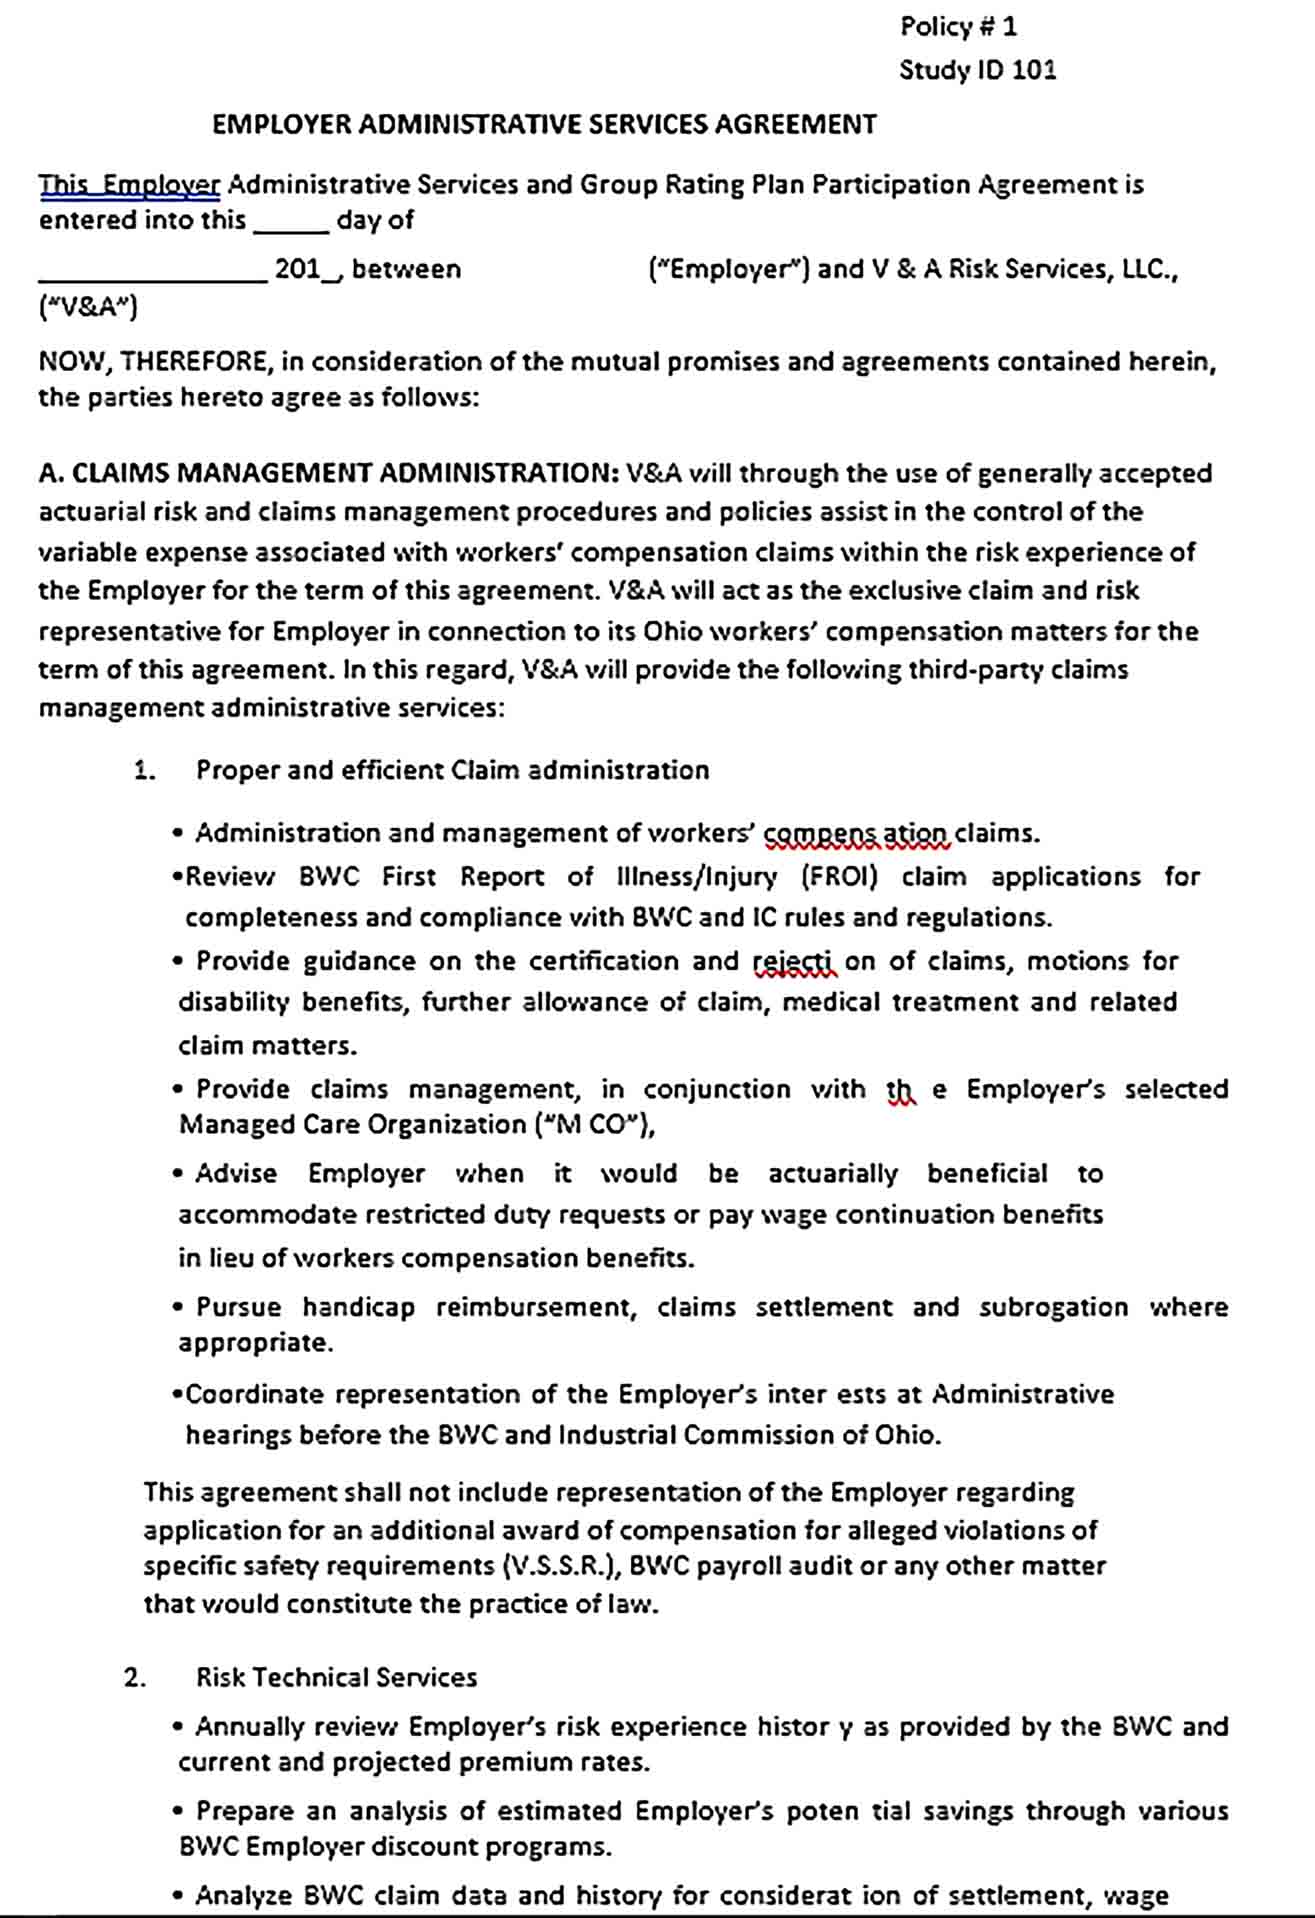 Sample Employer Administrative Services Agreement